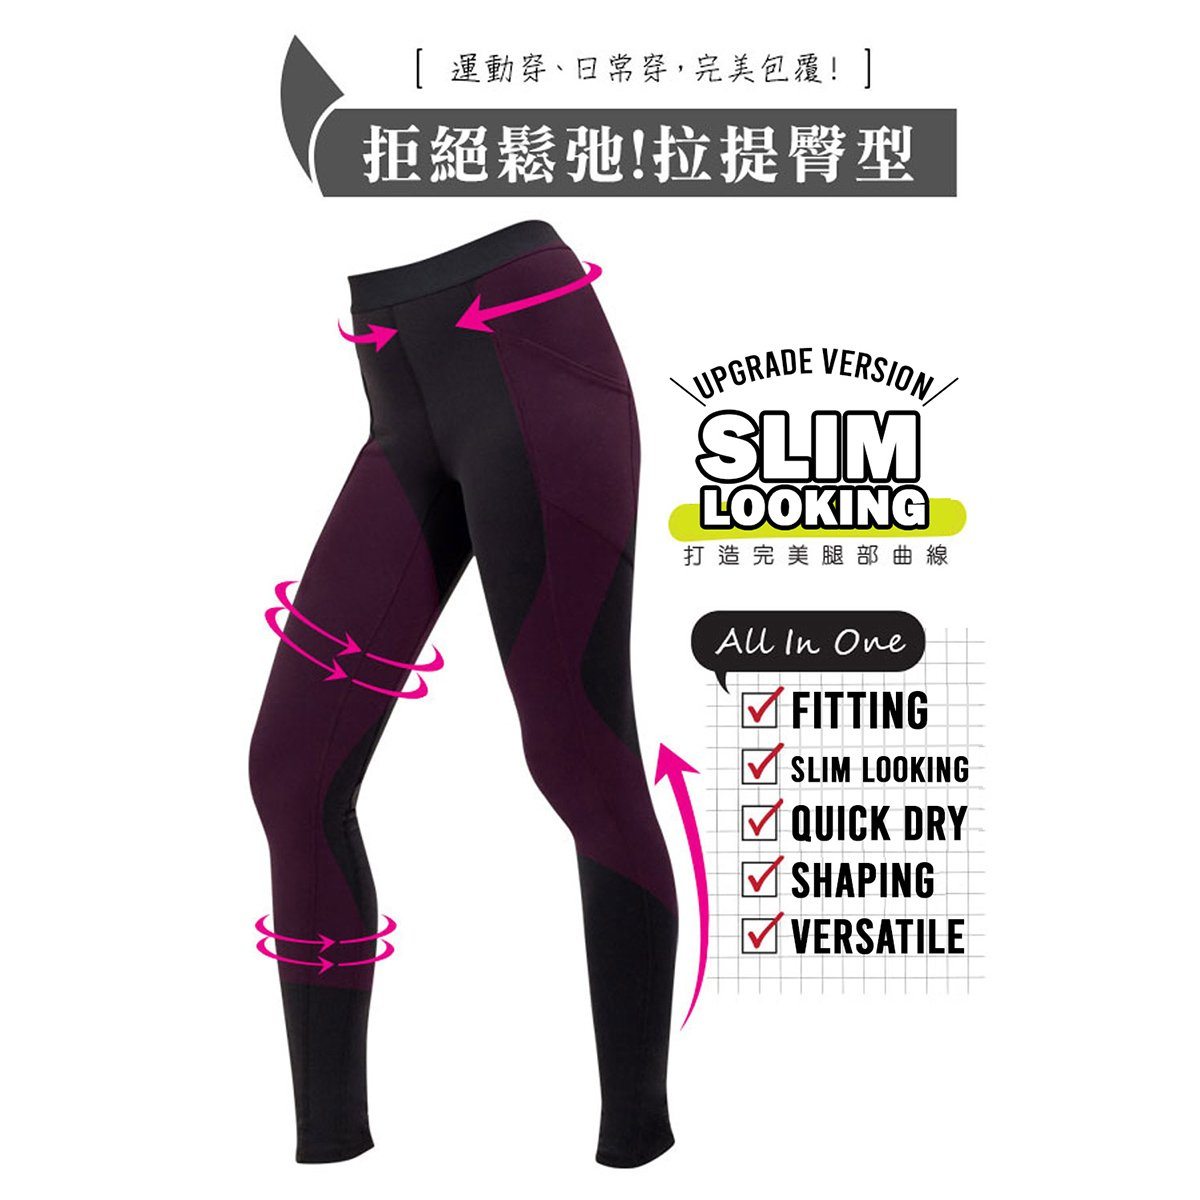 ($14.90 Only) Eheart Multi-Function Support Leggings with Pocket - Bloom Concept